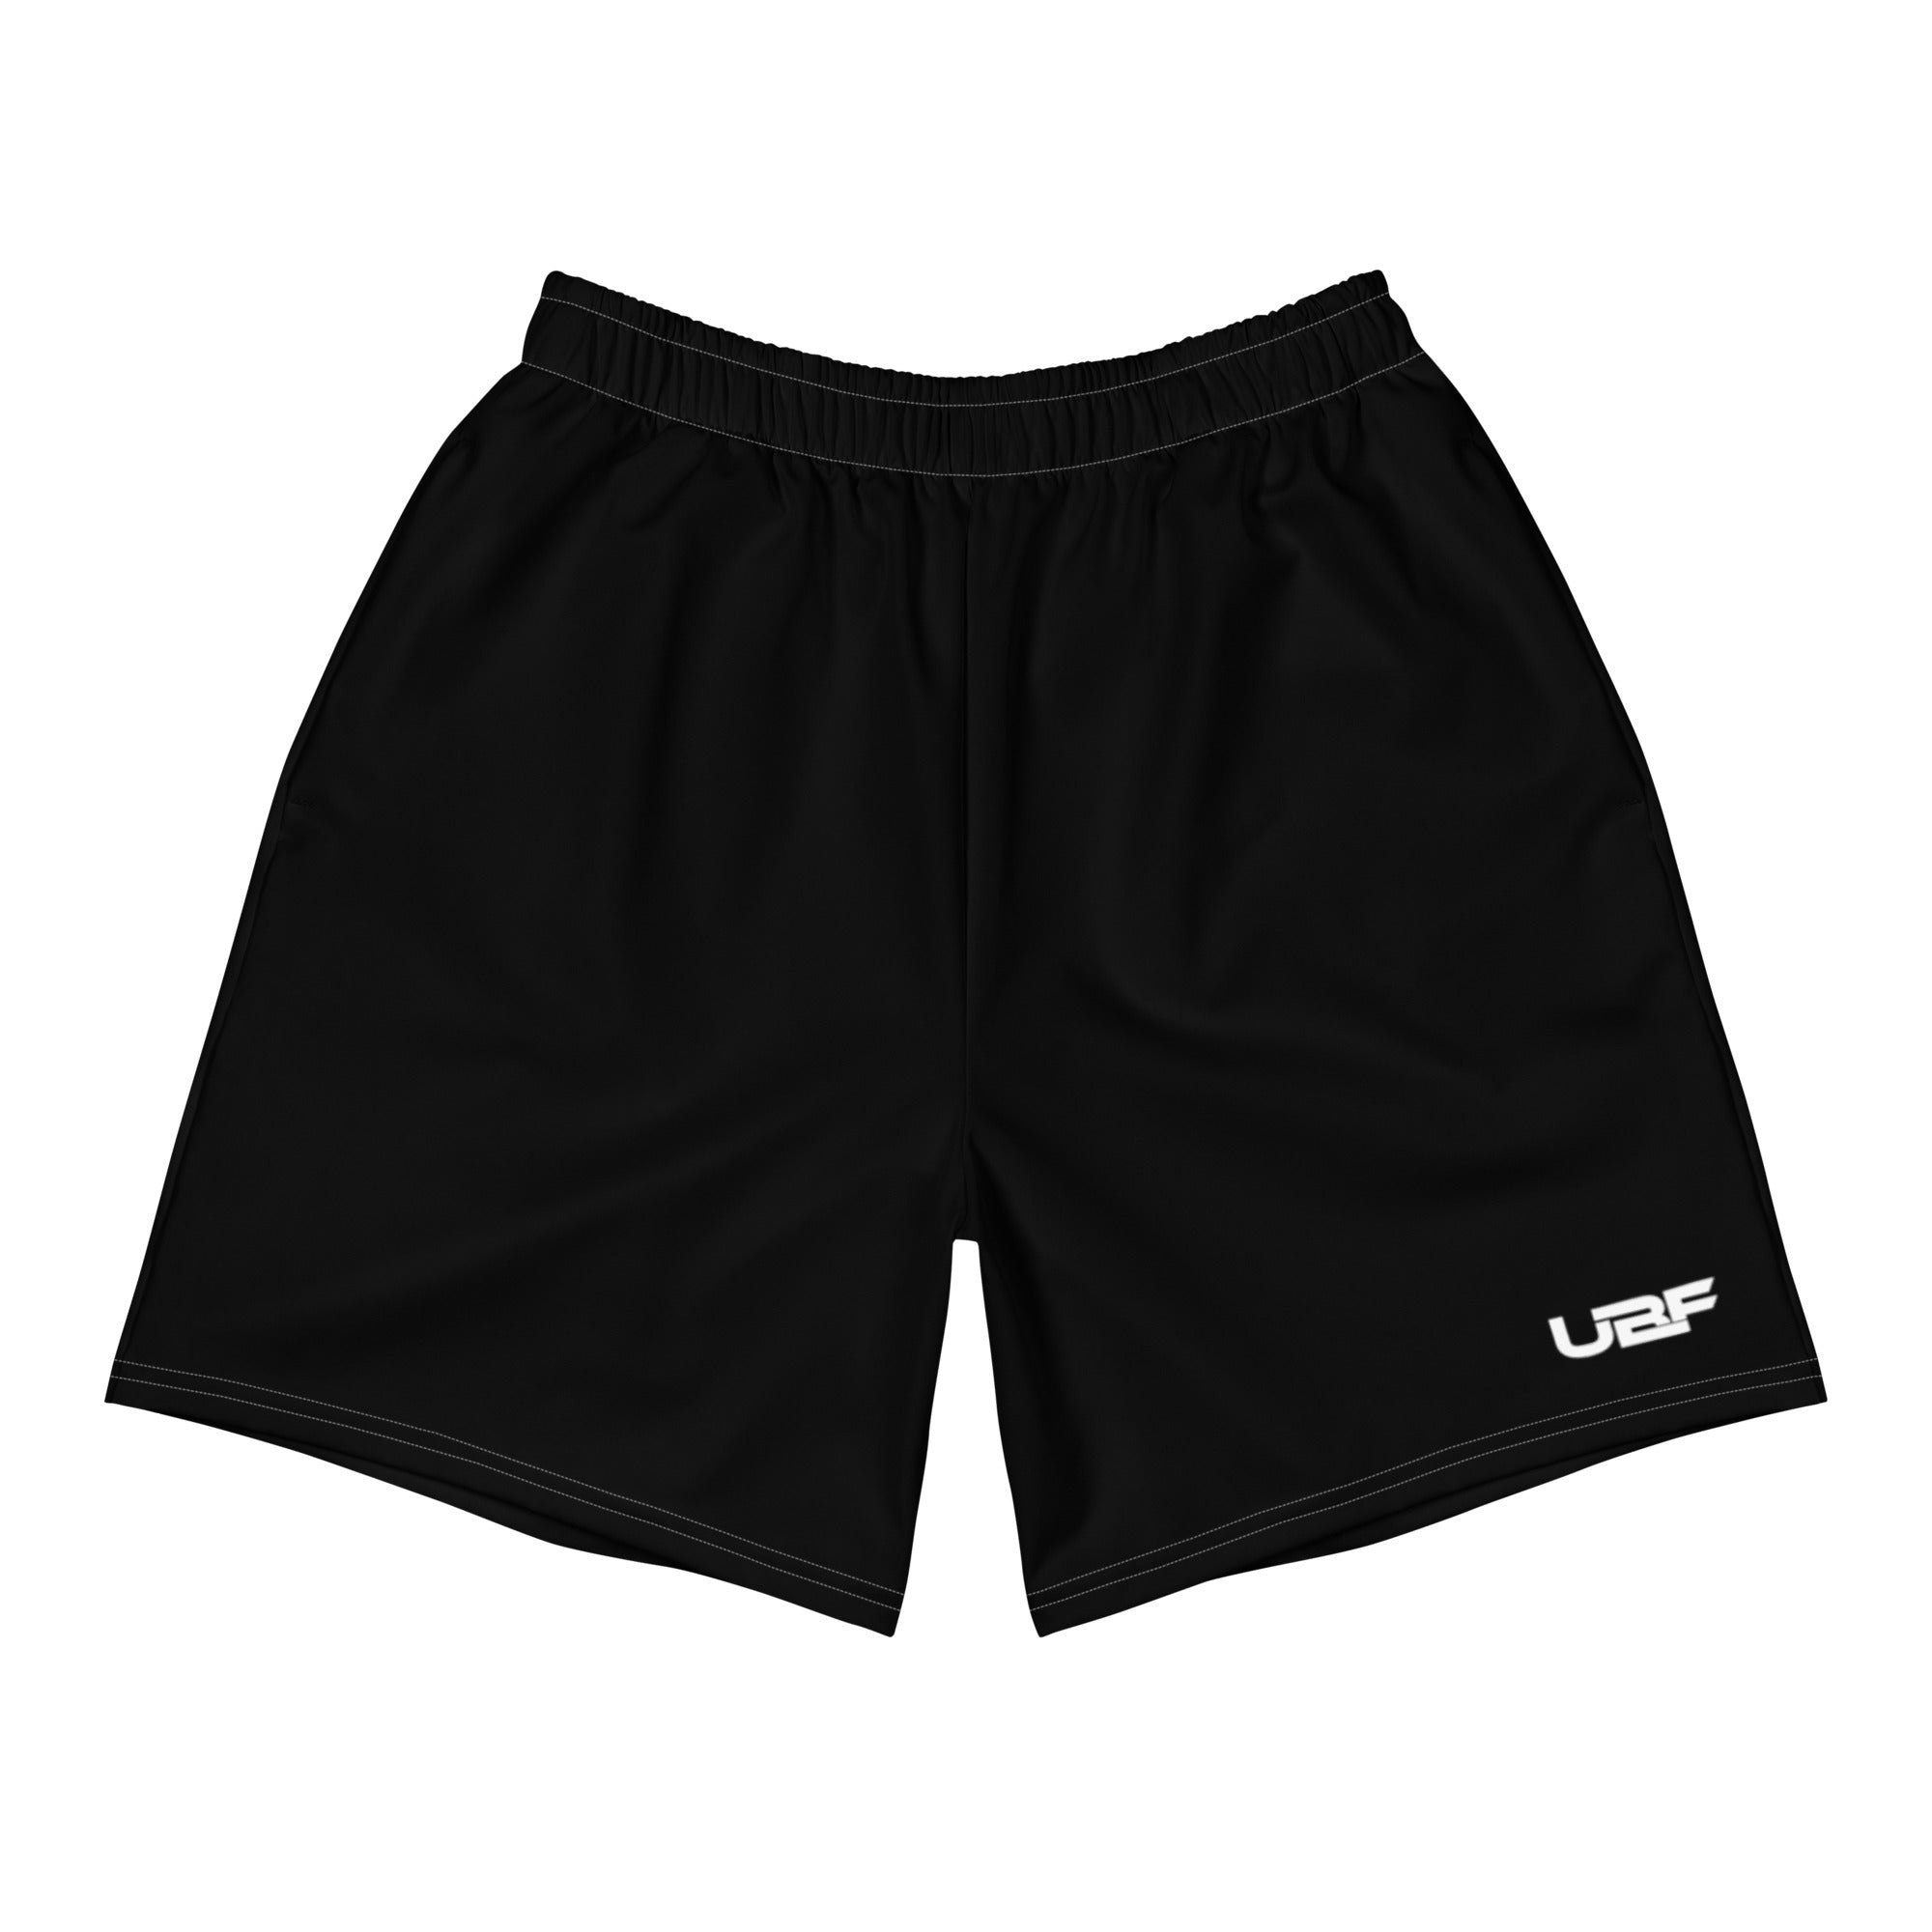 Men's White and Black Athletic Long Shorts